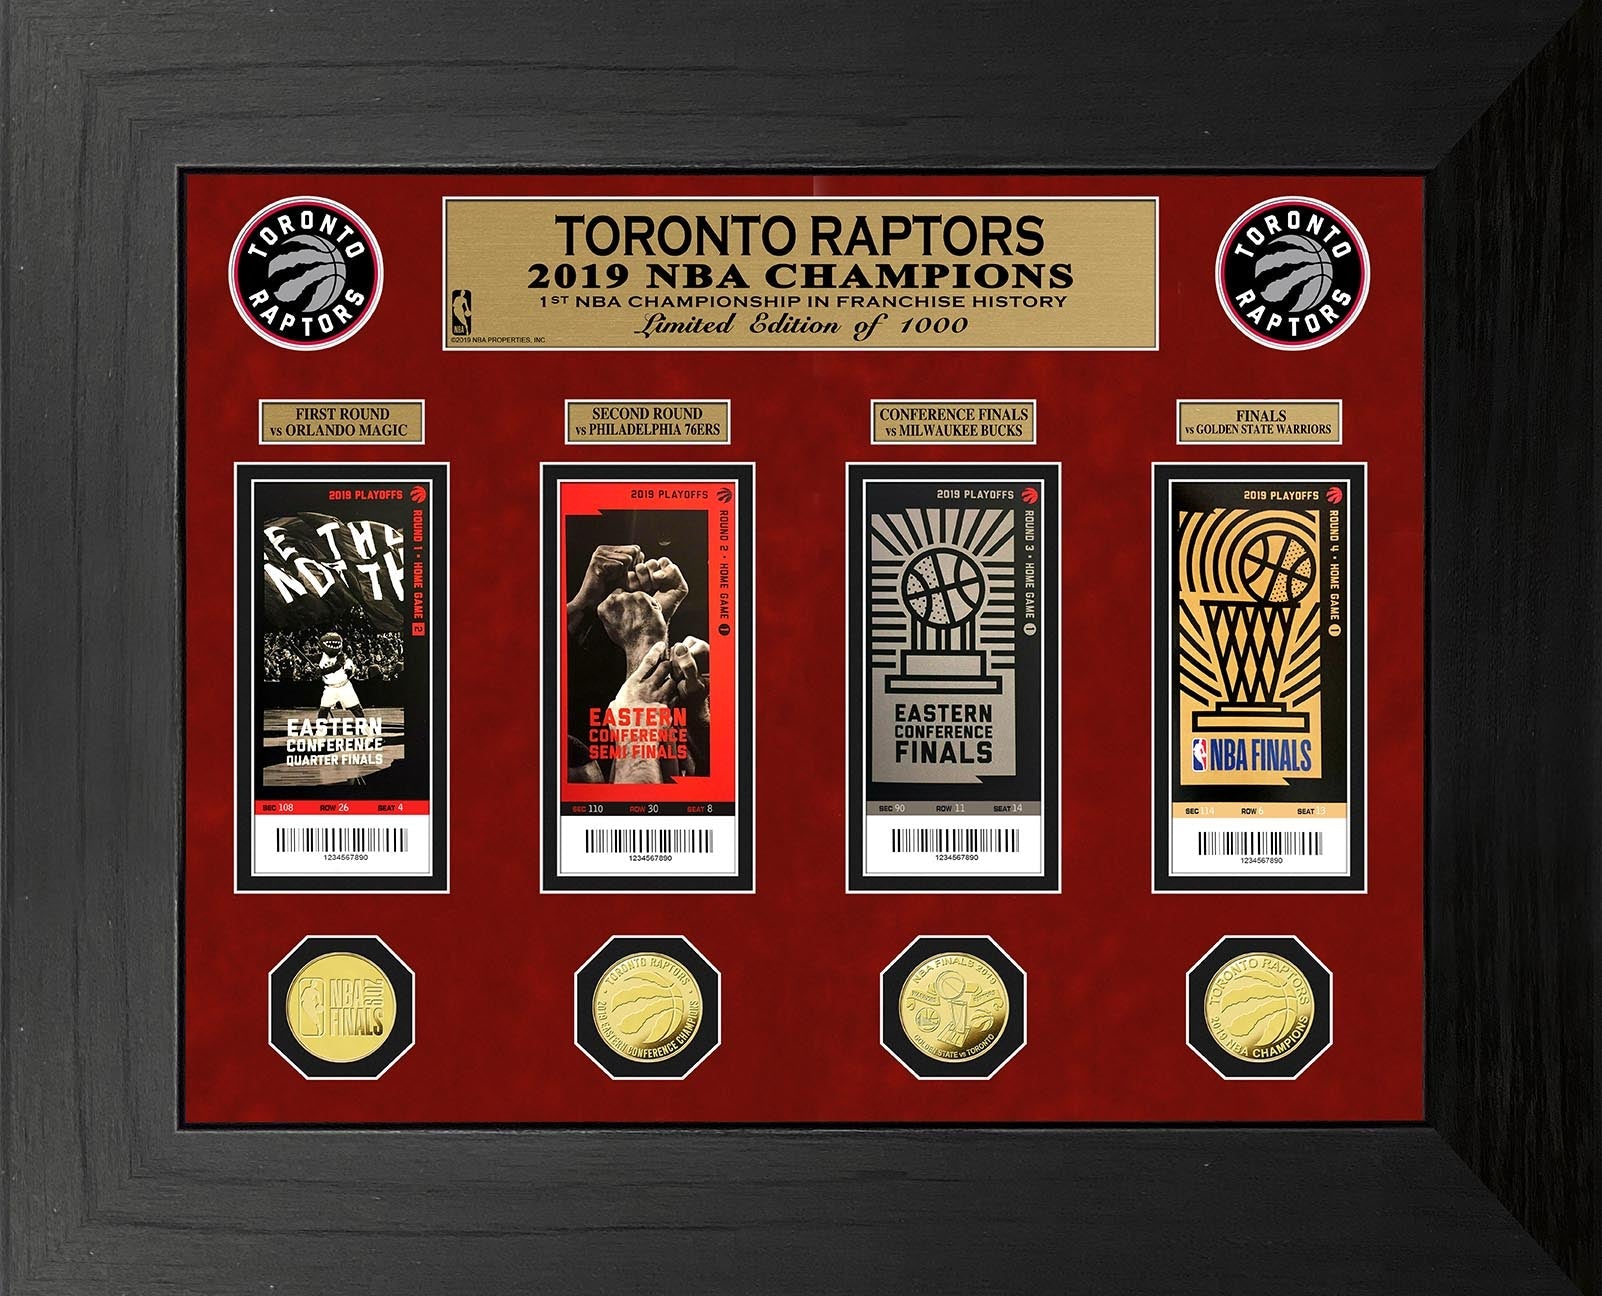 Toronto Raptors 2019 NBA Finals Champions Deluxe Gold Coin & Ticket Collection